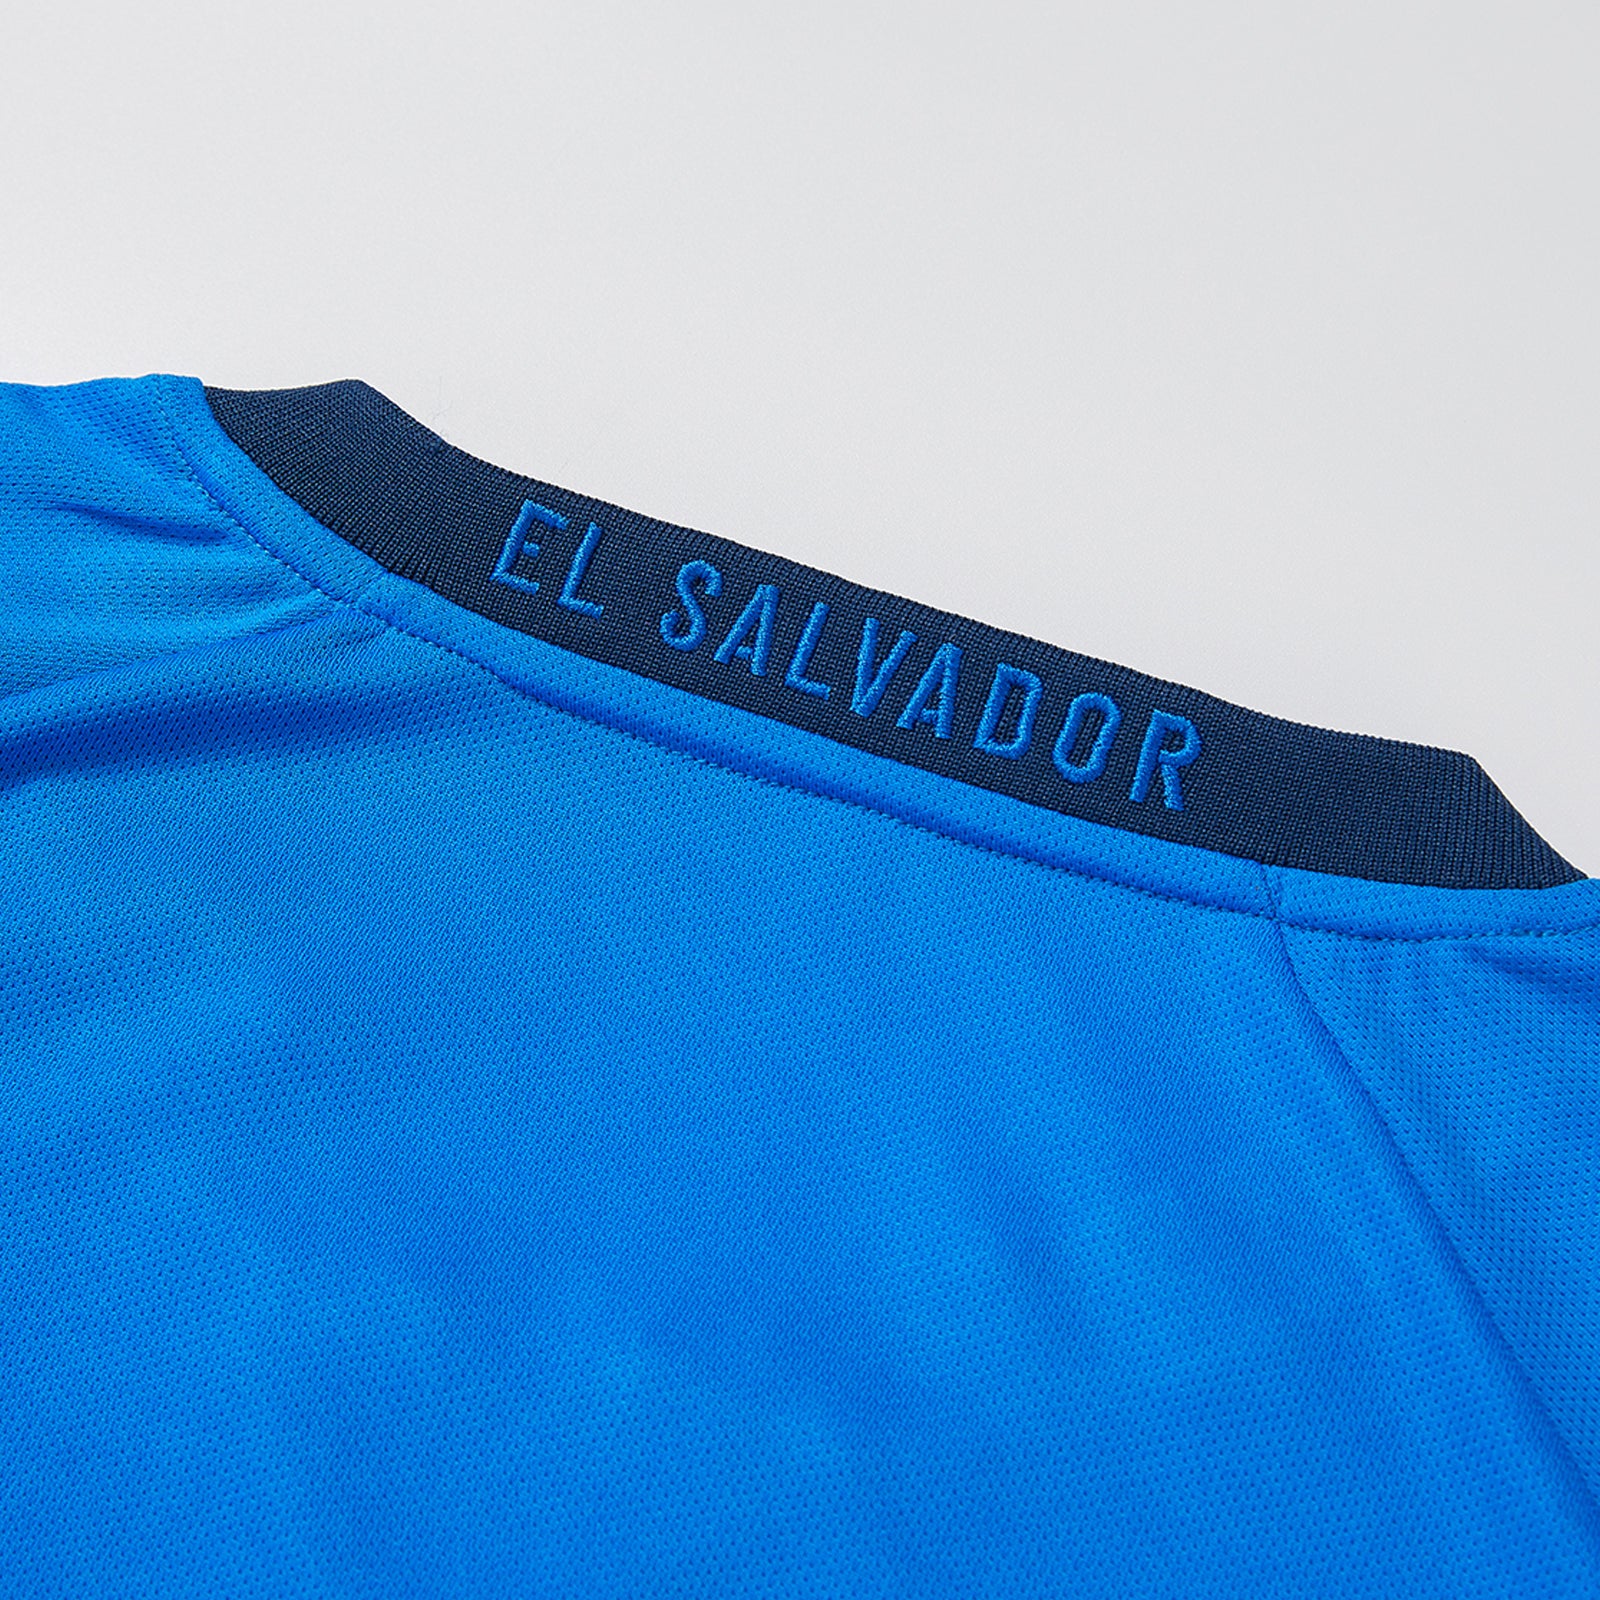  El Salvador Country Baseball Jersey, El Salvador Flag Shirt,  Salvadorans Pride Jersey, El Salvadoreña Jersey (Multi 1) : Clothing, Shoes  & Jewelry